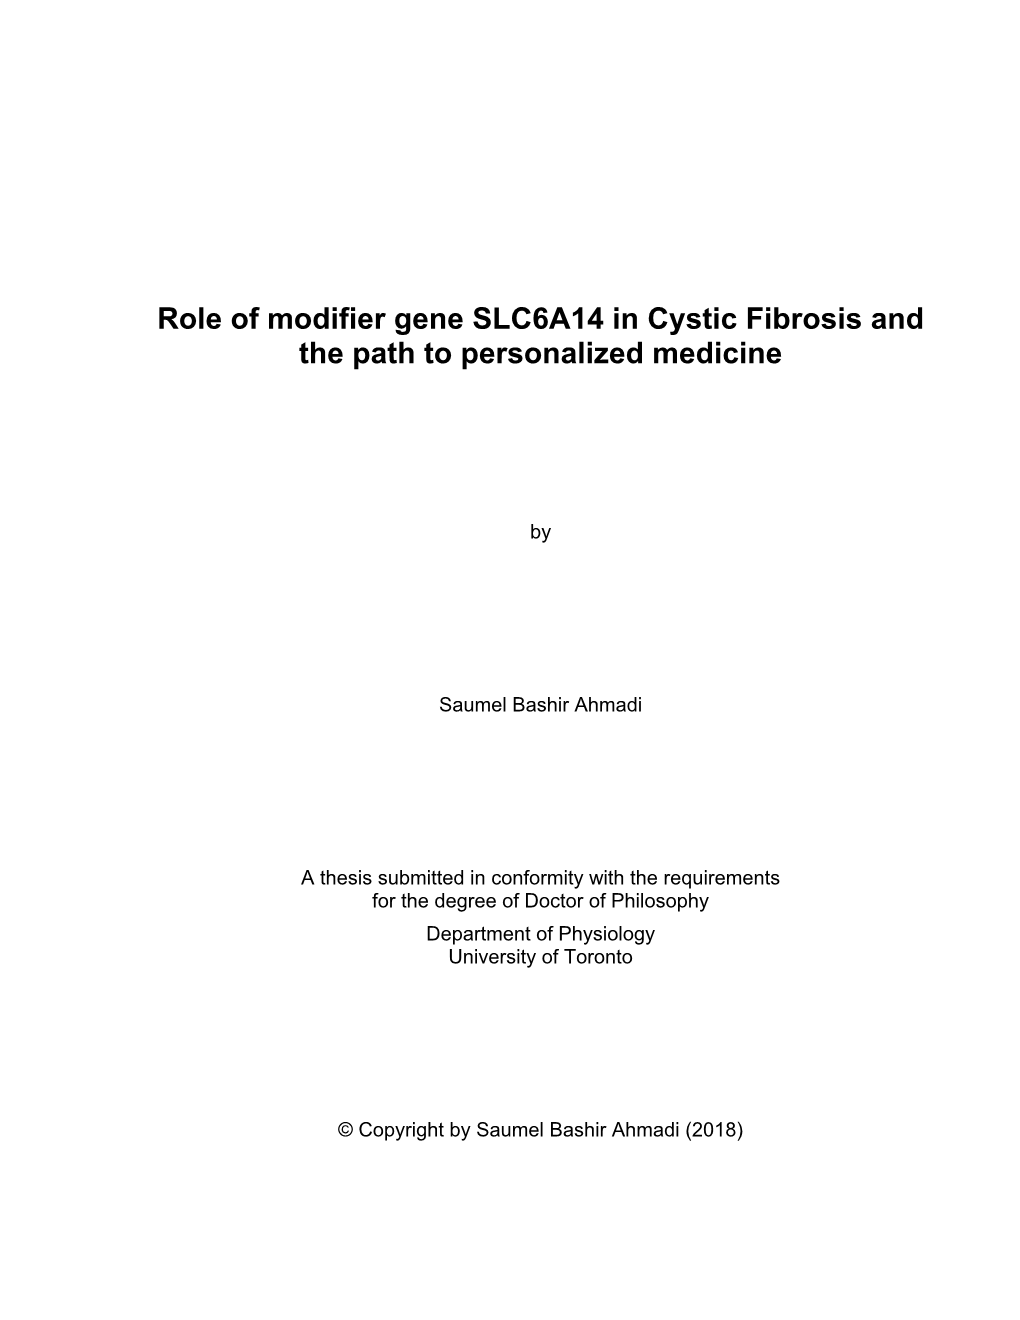 Role of Modifier Gene SLC6A14 in Cystic Fibrosis and the Path to Personalized Medicine